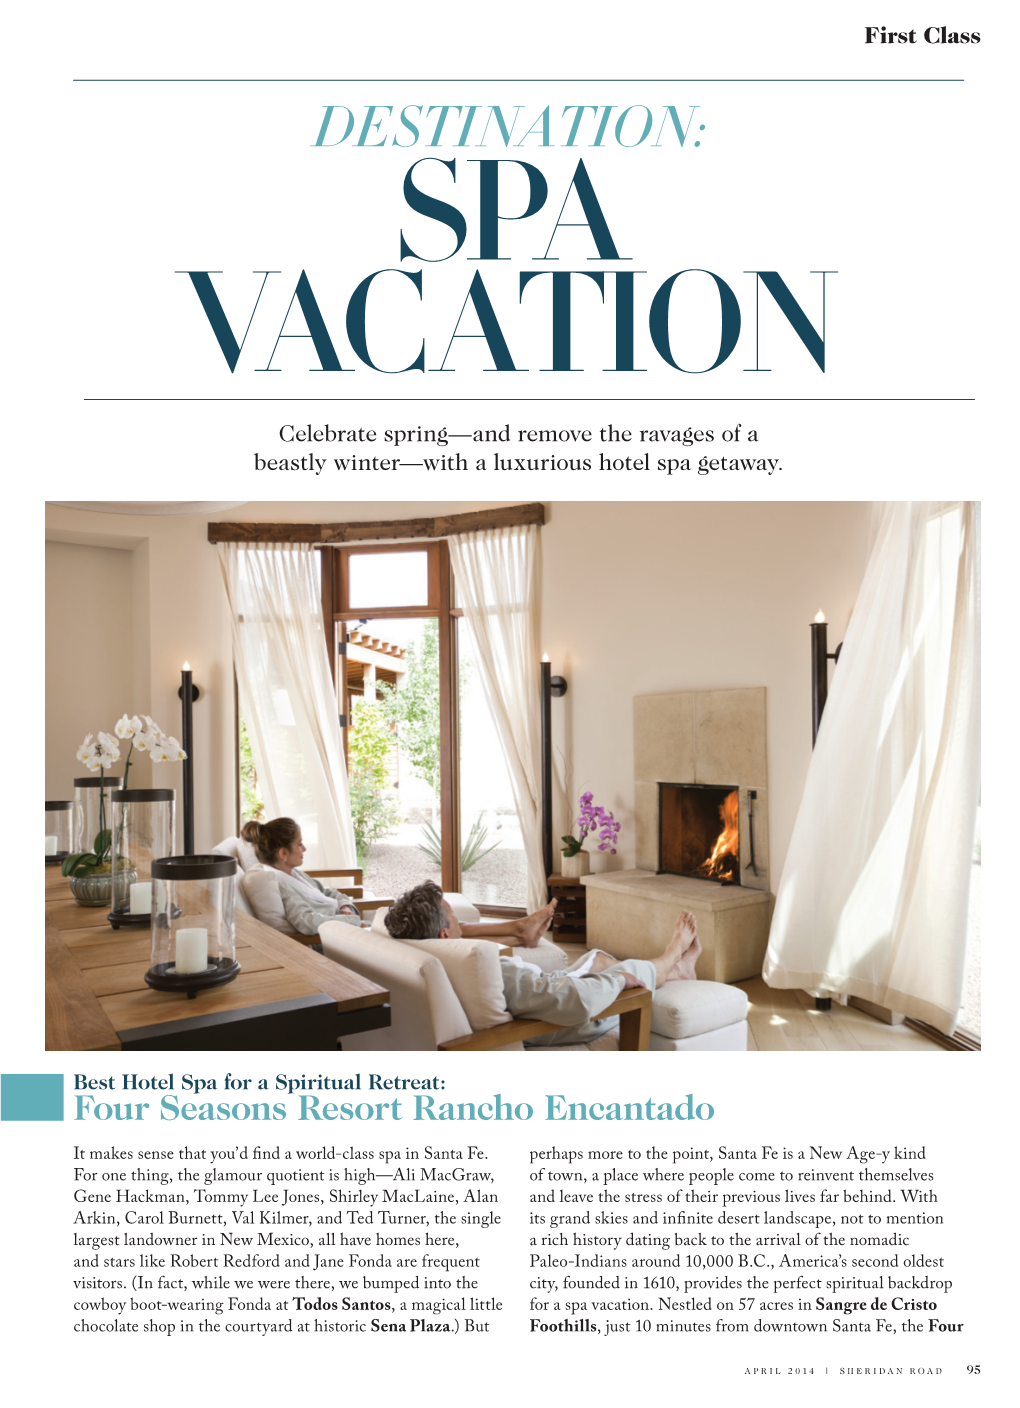 DESTINATION: SPA VAC ATION Celebrate Spring—And Remove the Ravages of a Beastly Winter—With a Luxurious Hotel Spa Getaway